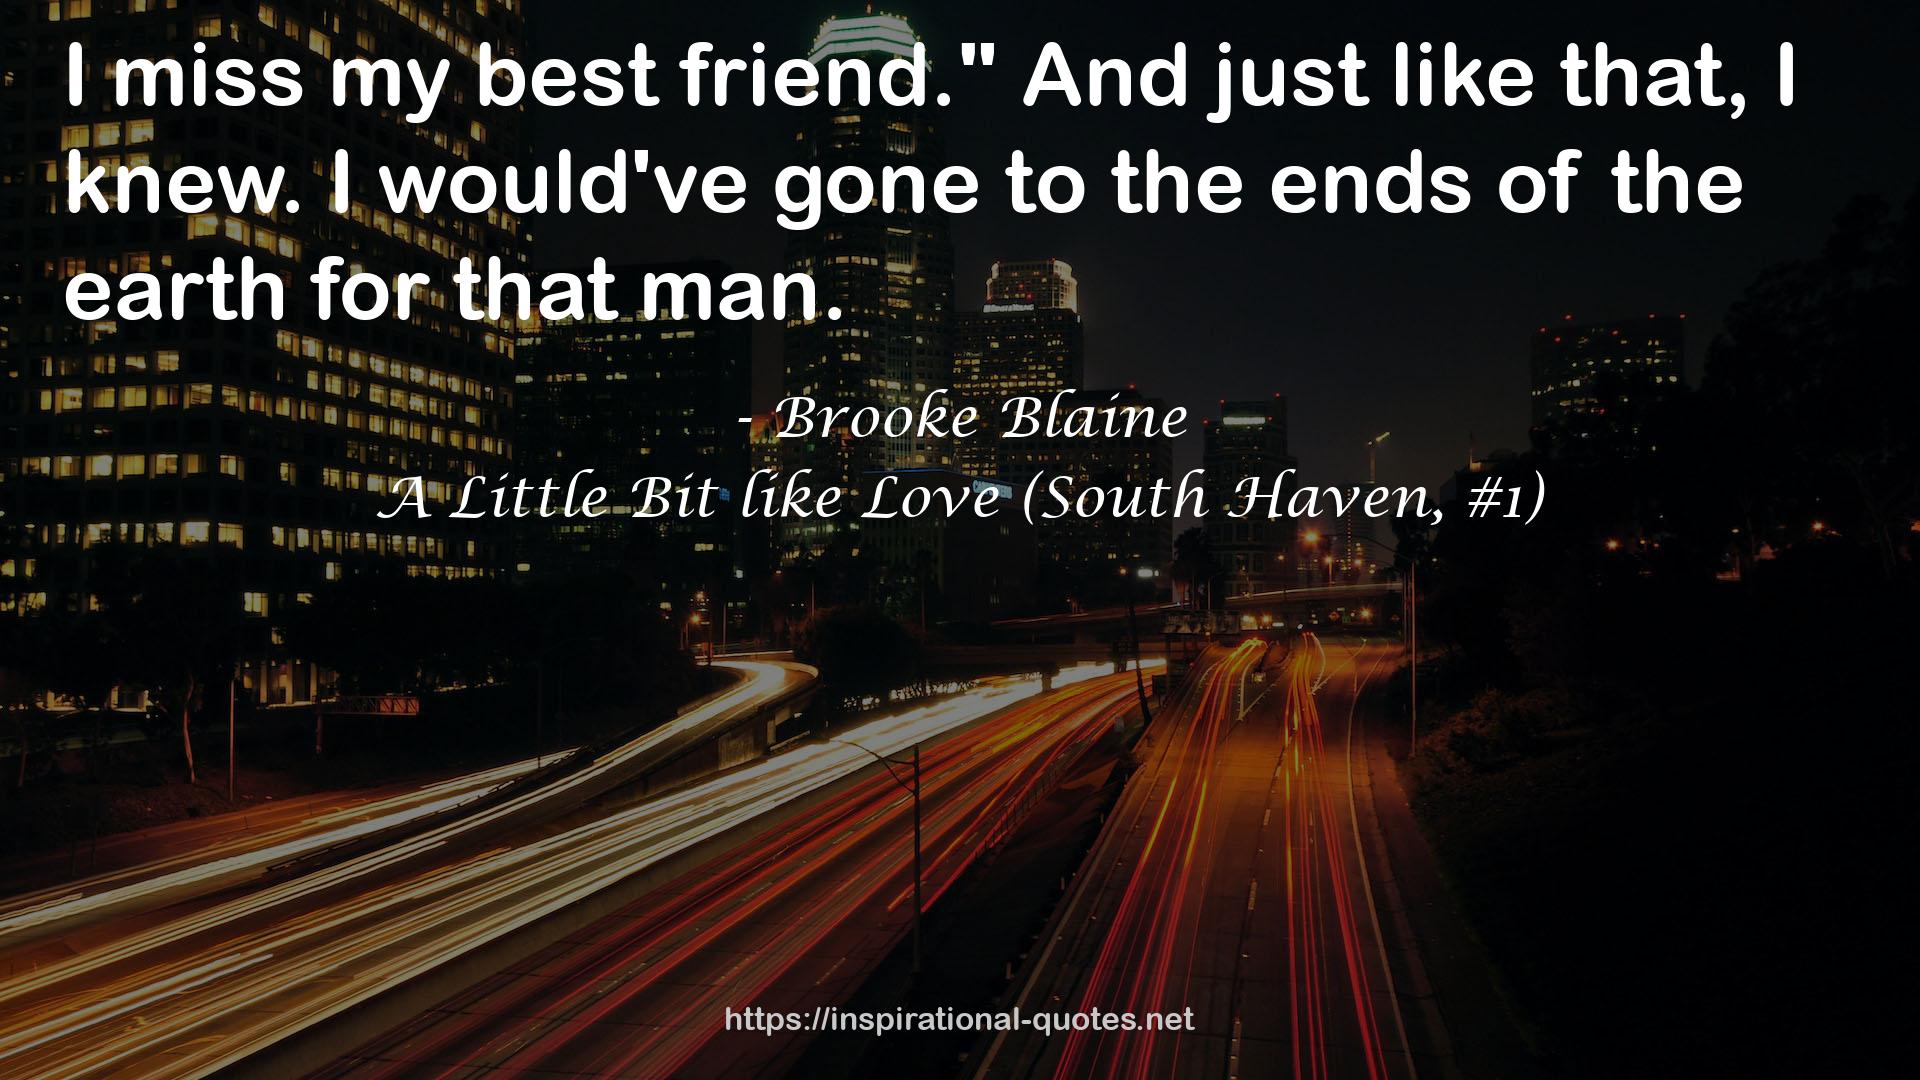 A Little Bit like Love (South Haven, #1) QUOTES